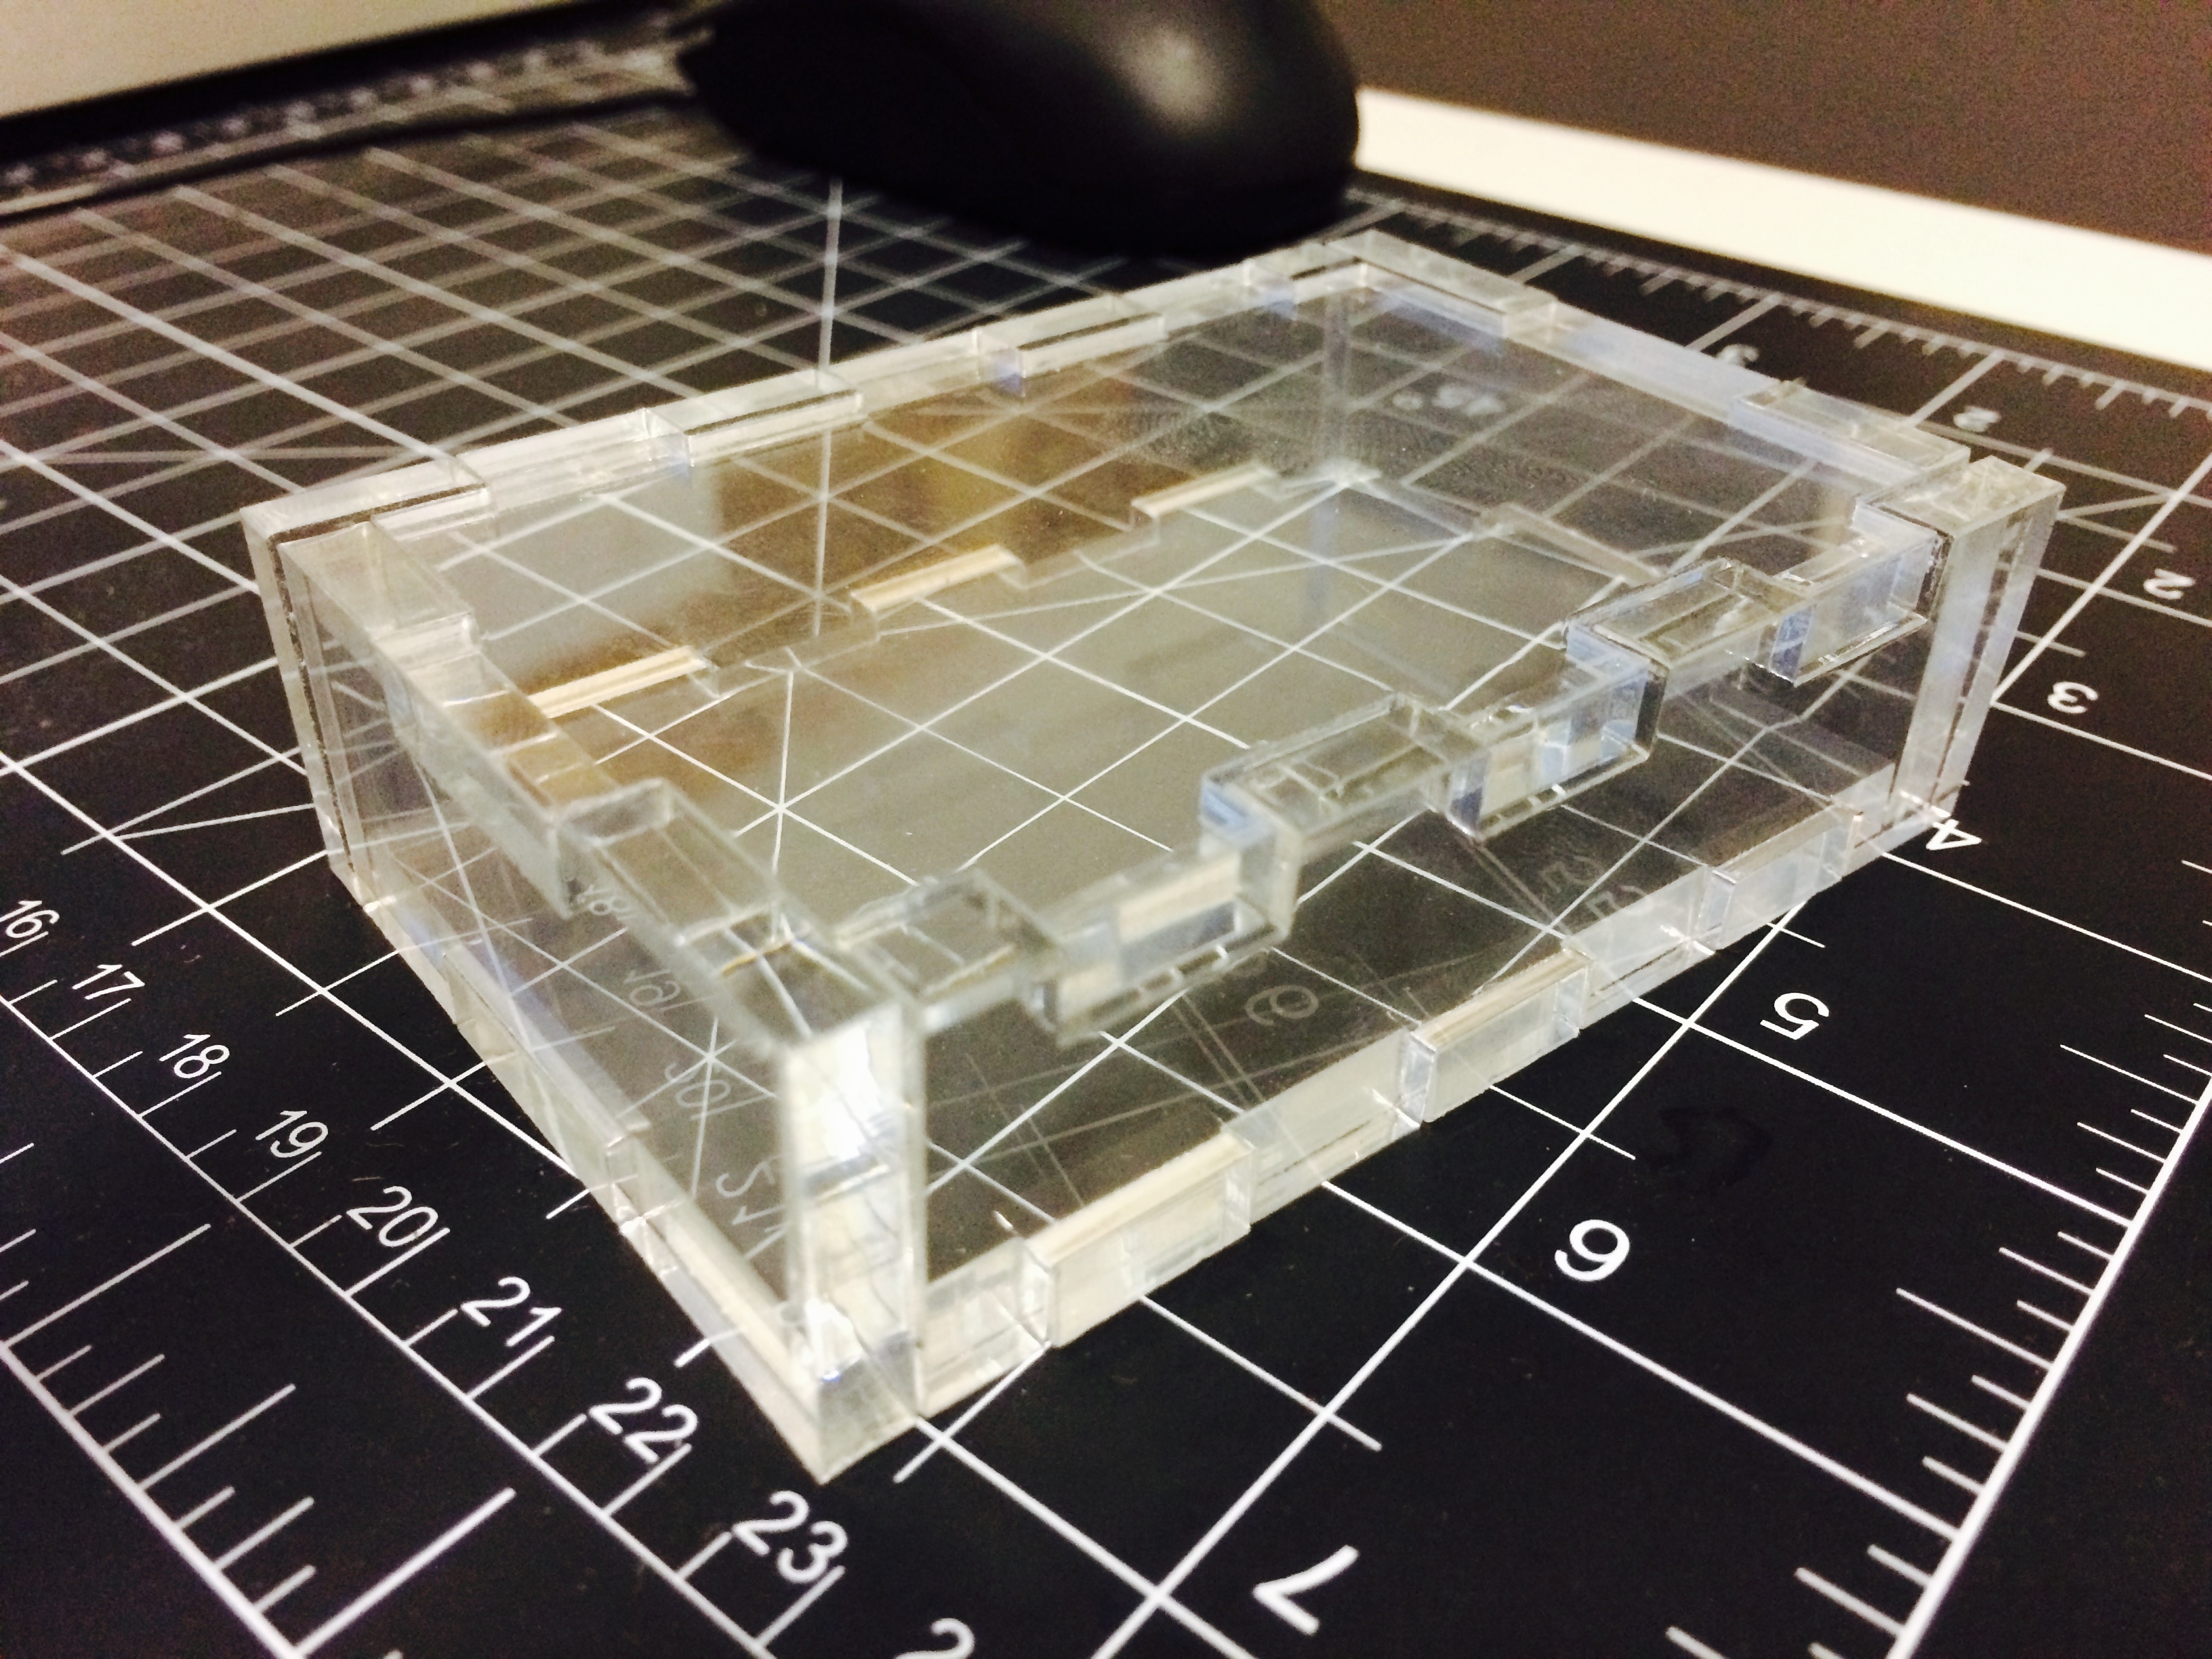 Source Plexiglass with Box with Finger Joints Transparent Perspex Project  enclosures Laser Cut Acrylic Comb-Jointed Box on m.